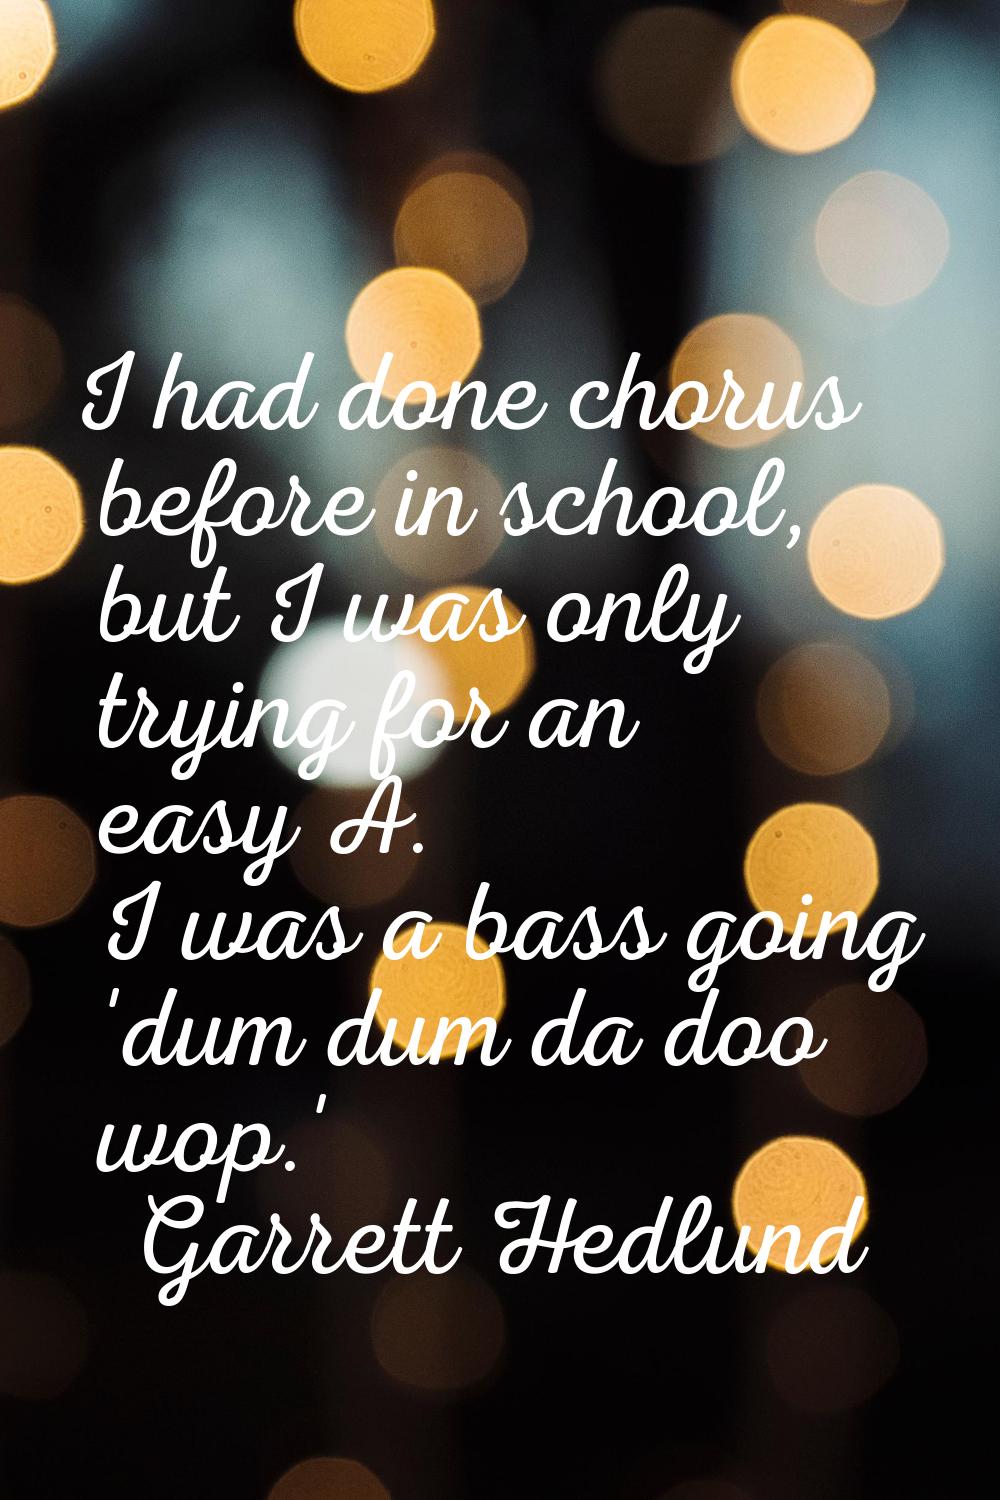 I had done chorus before in school, but I was only trying for an easy A. I was a bass going 'dum du